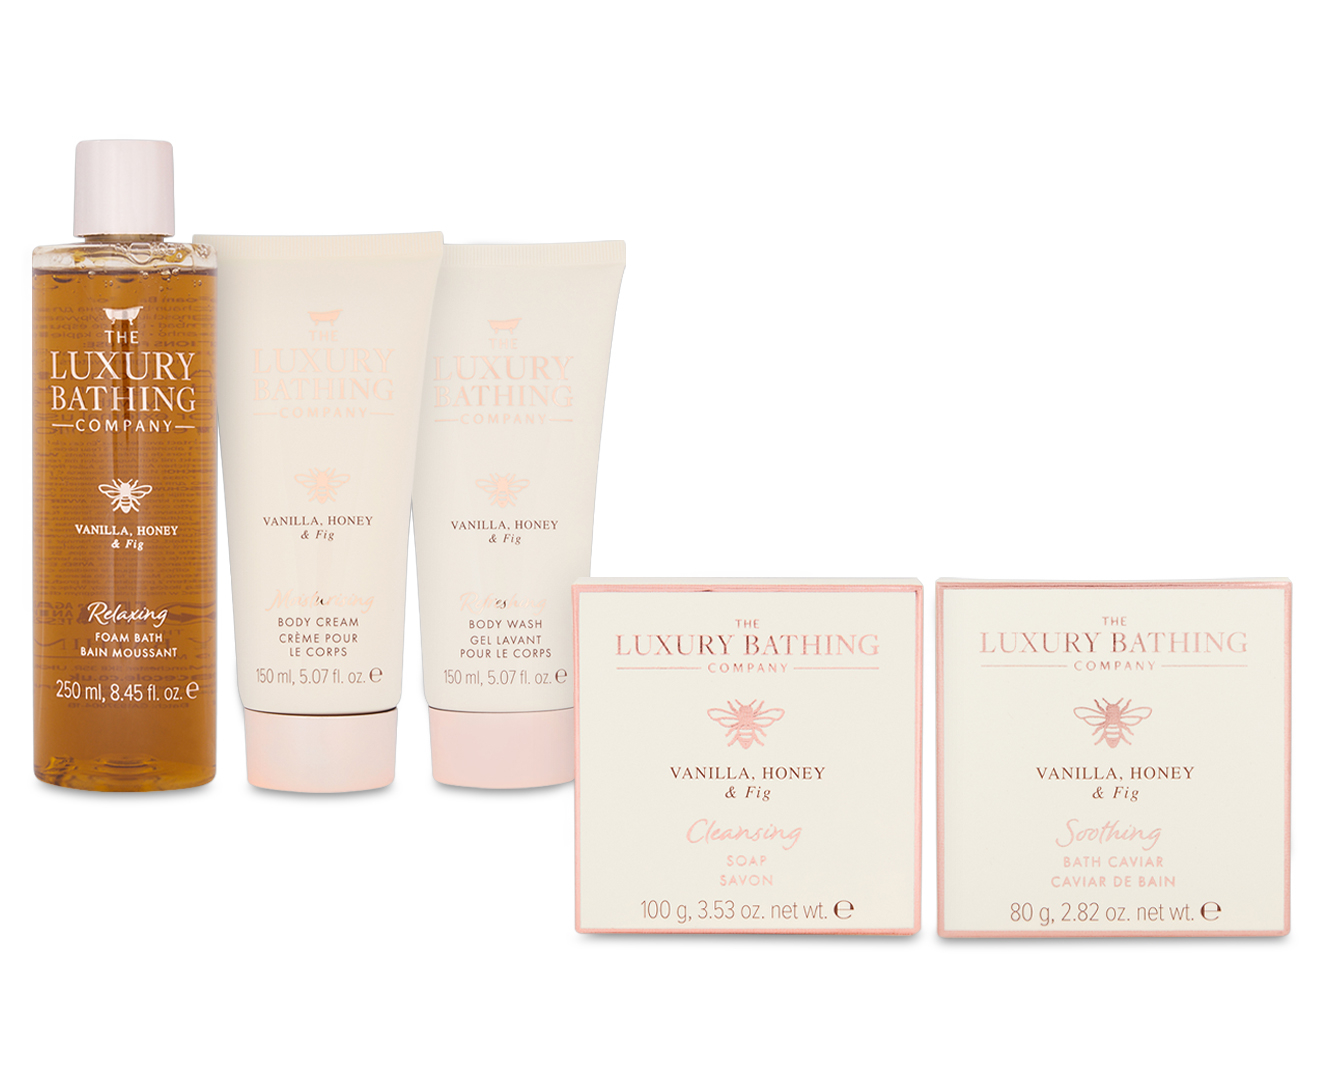 The Luxury Bathing Company by Grace All Things Beautiful Gift Set For Women Vanilla, Honey & Fig Catch.com.au